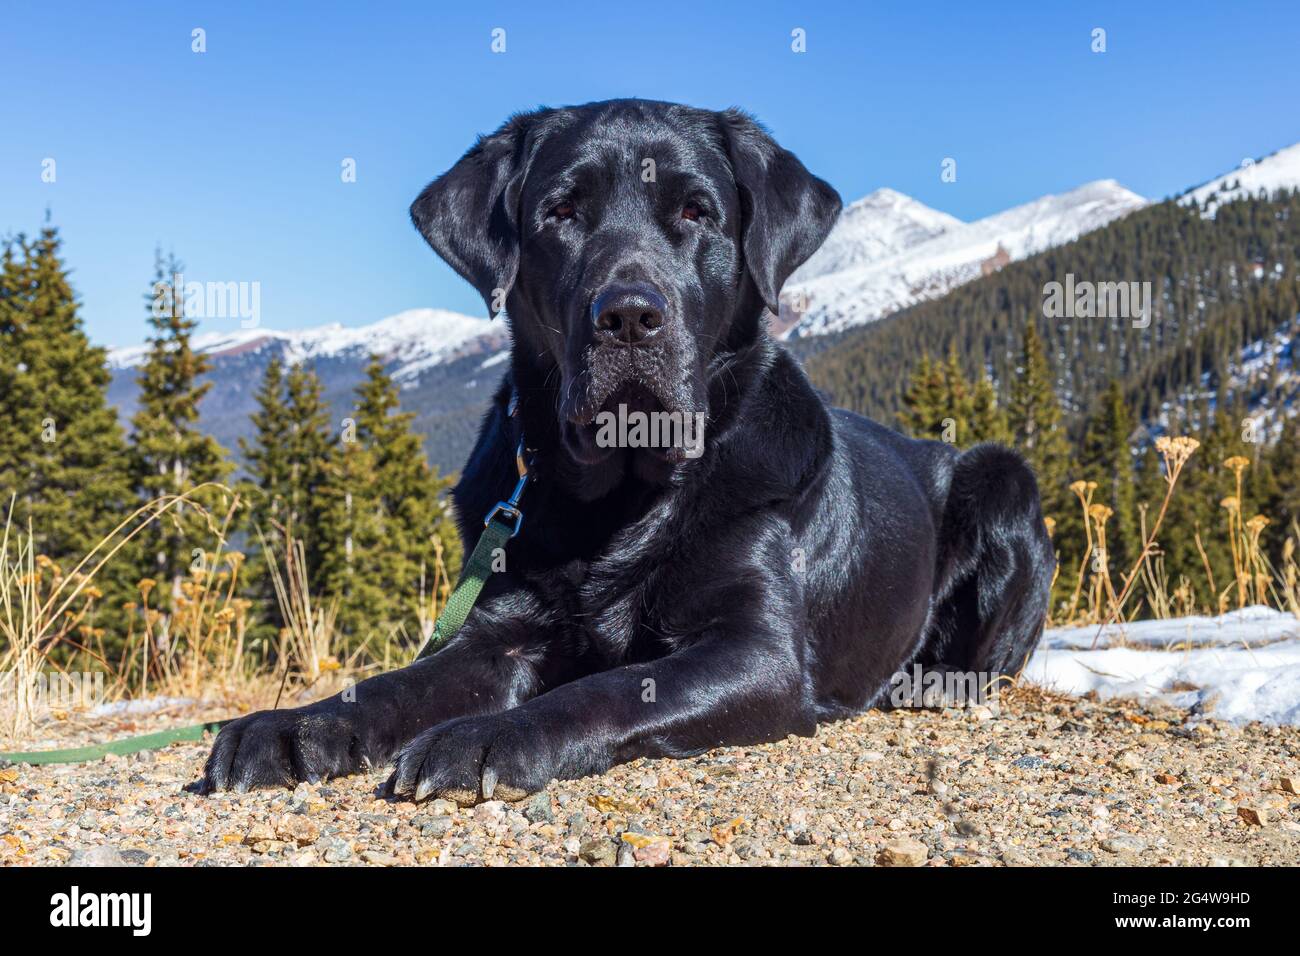 Calm, black labrador retriever dog lays on the dirt with the Arapaho national forest behind him and the snow-capped Rocky Mountains in the distance. Stock Photo